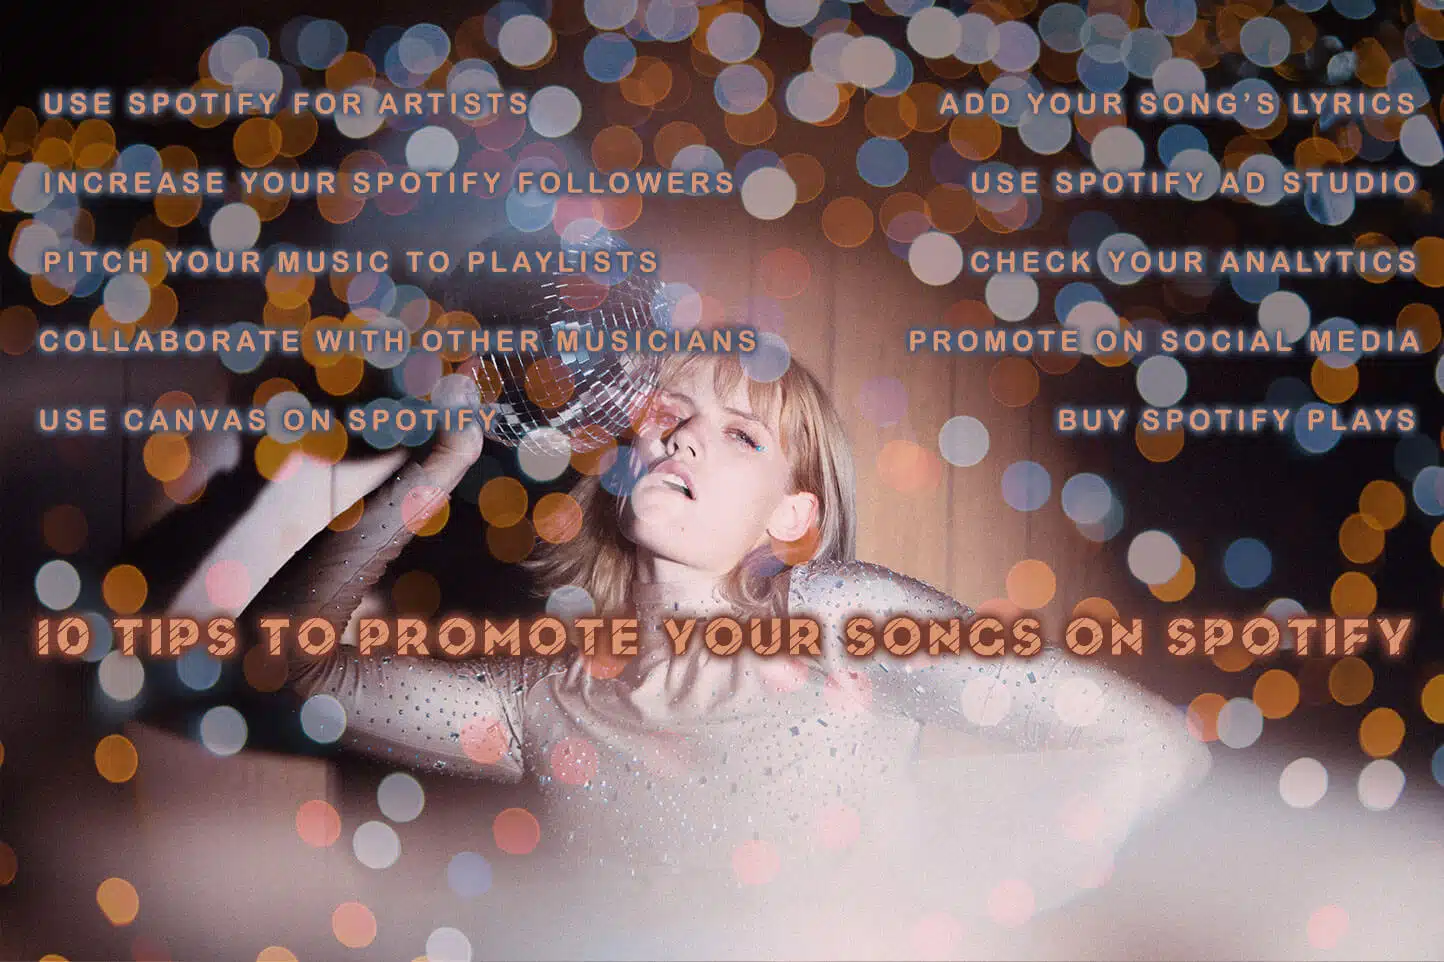 Image-with-10-tips-to-promote-on-spotify-your-songs